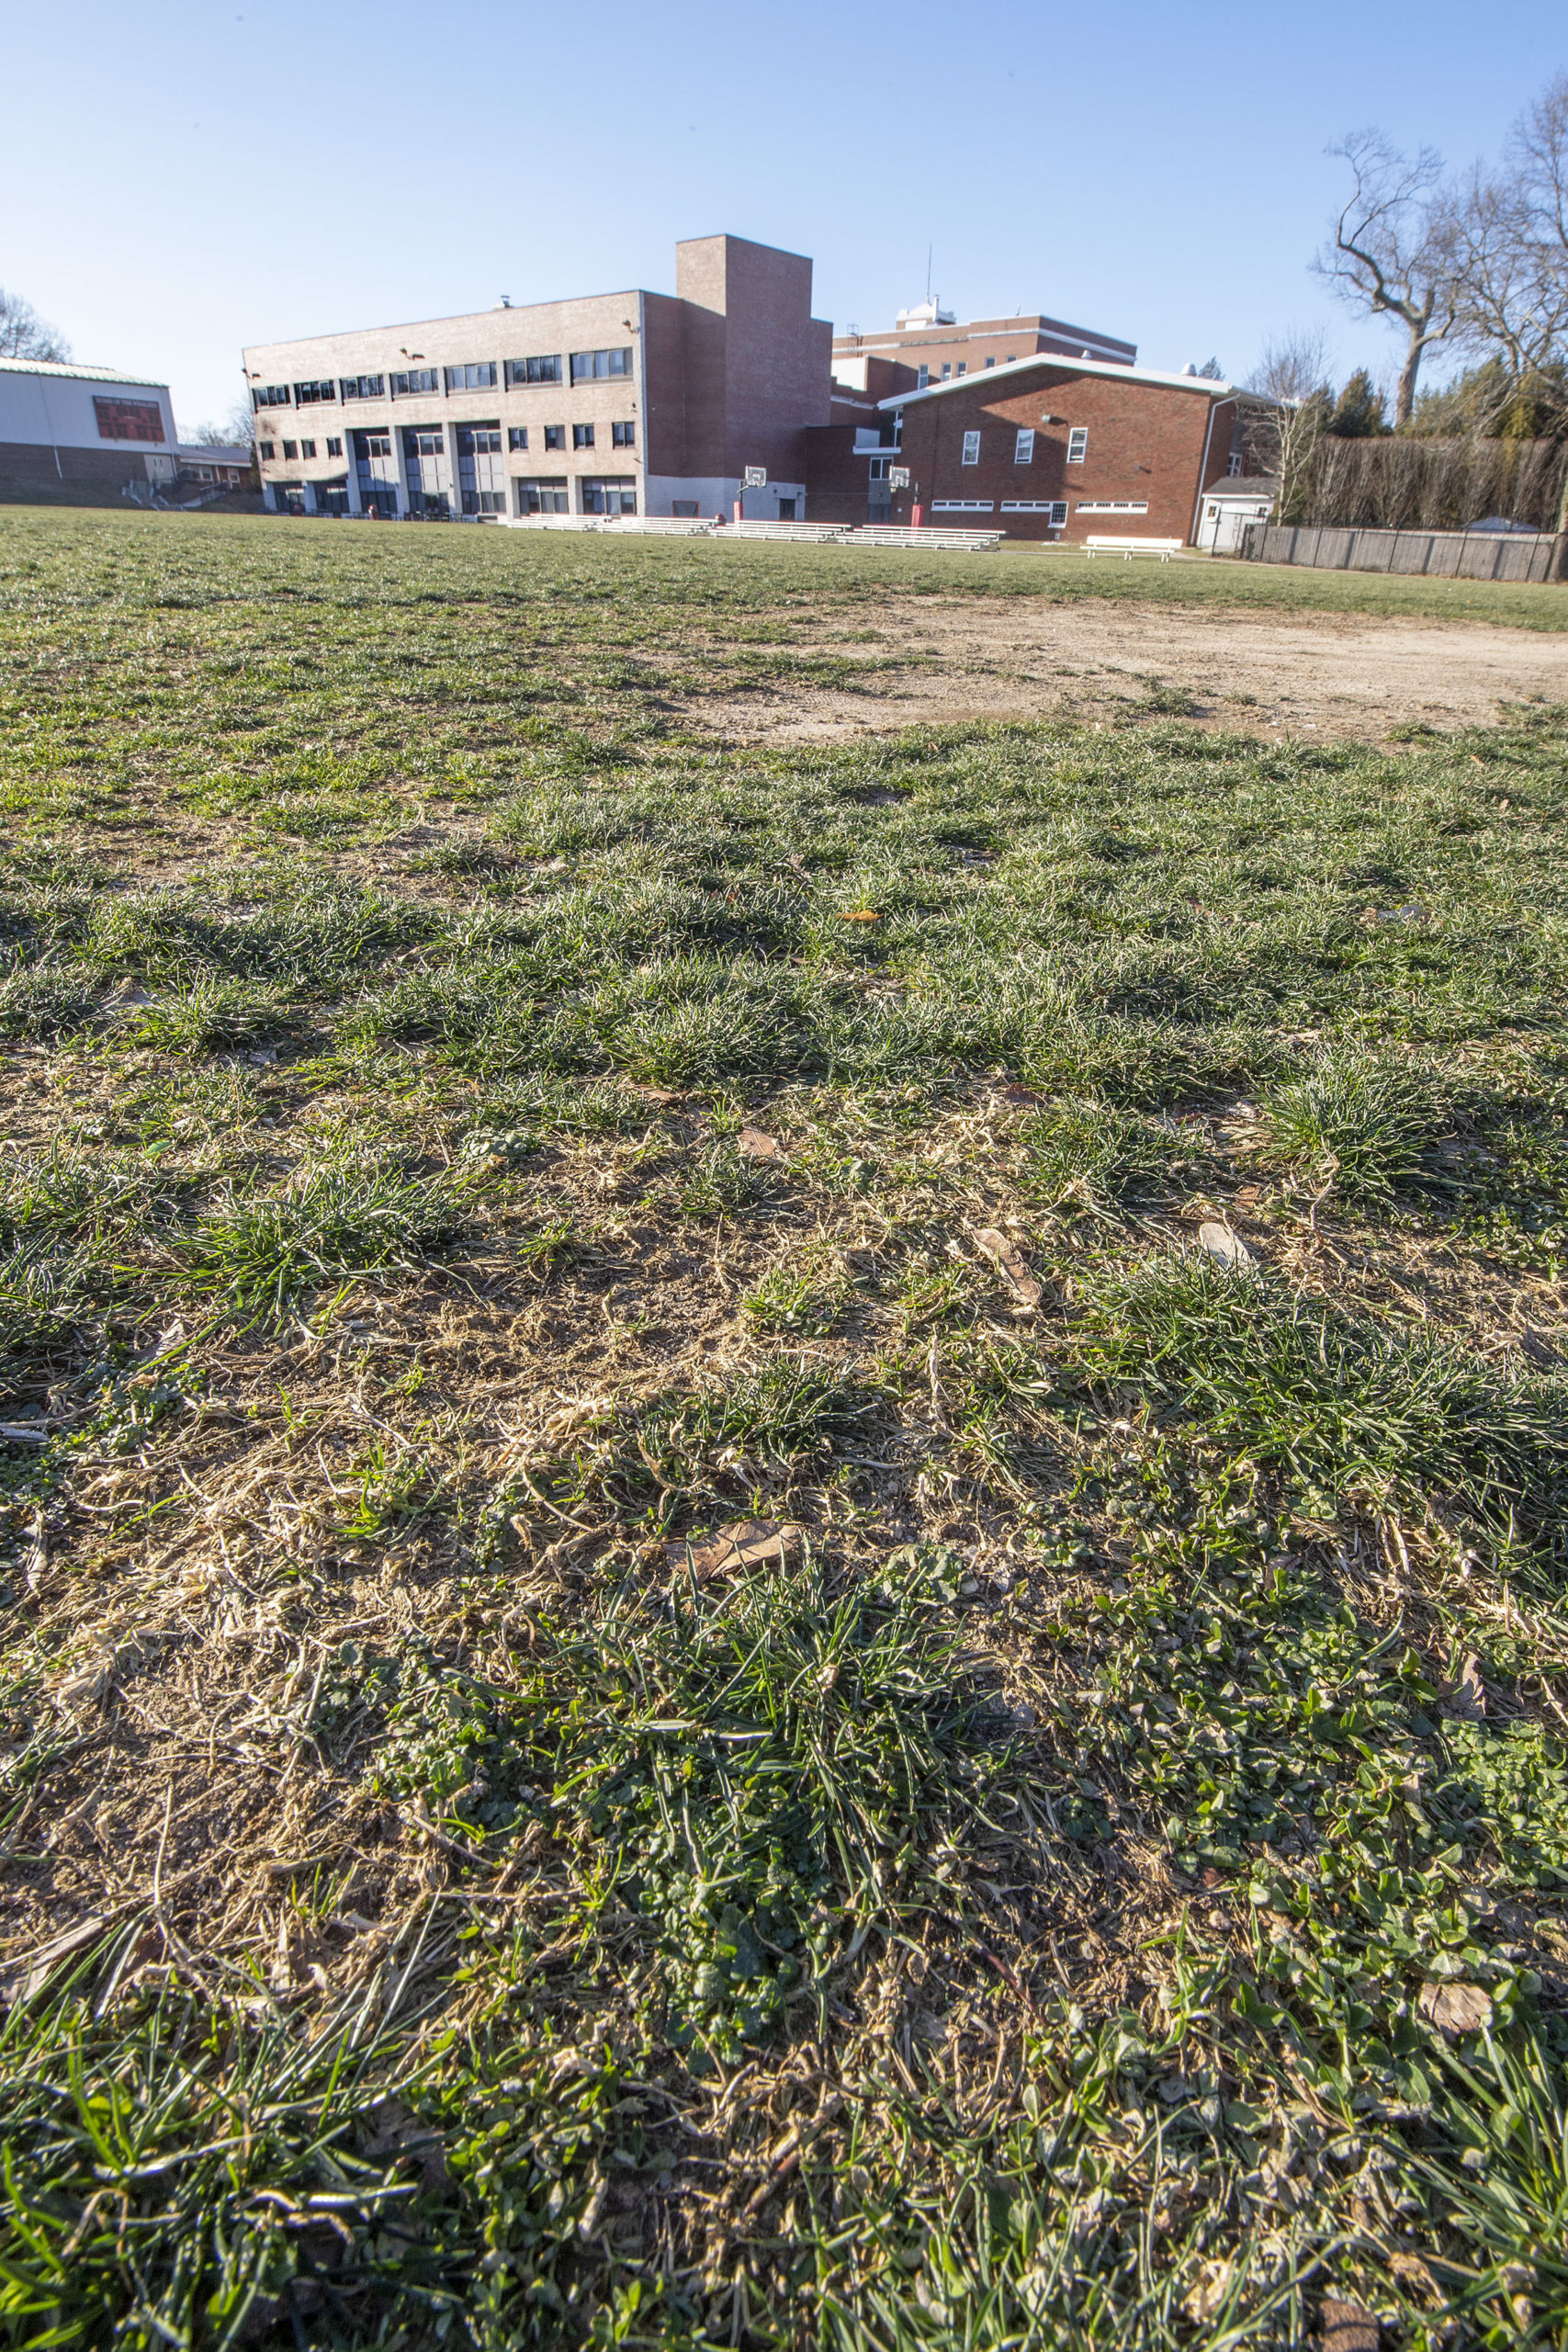 Pierson installed a new natural grass field in 2017, after the community voted against artificial turf, bu the drive for artificial turf could be renewed soon.